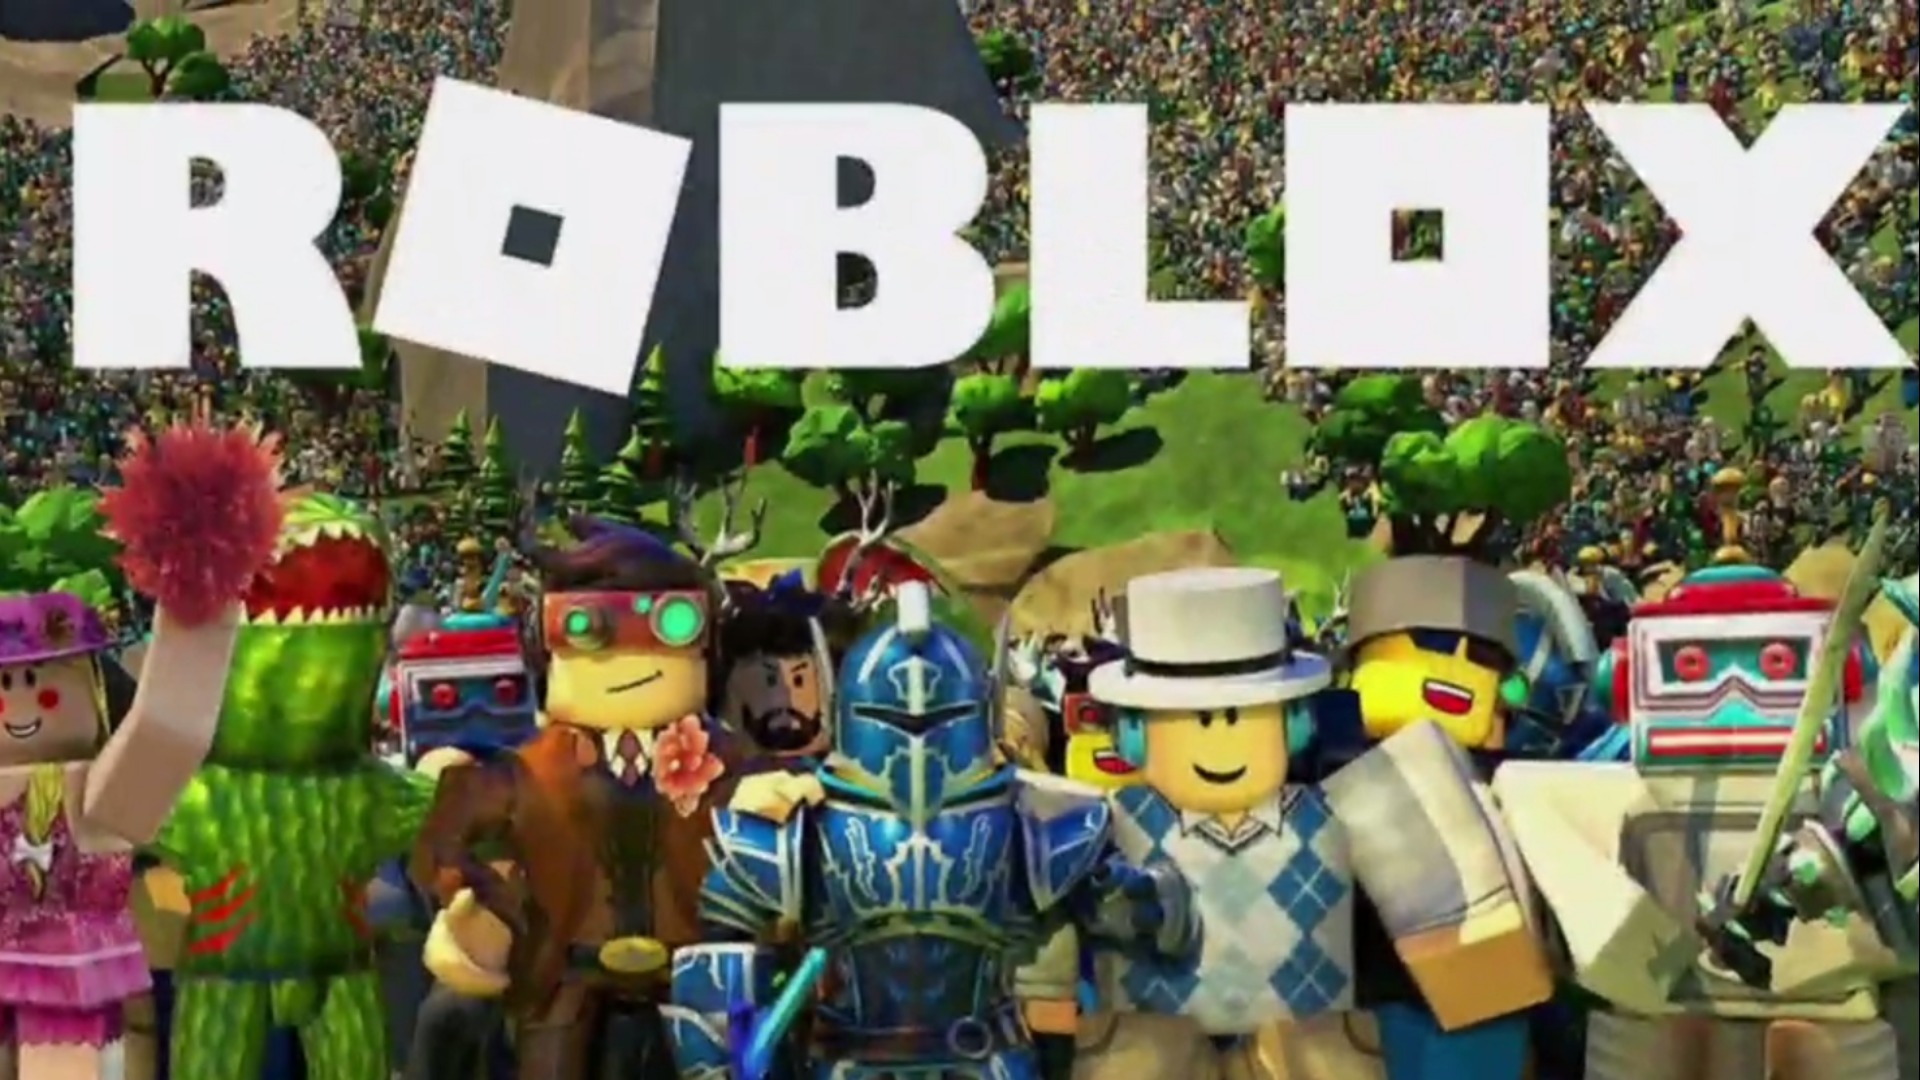 New Questions About Some Inappropriate Content On The Gaming Platform Roblox Video - roblox live cricket